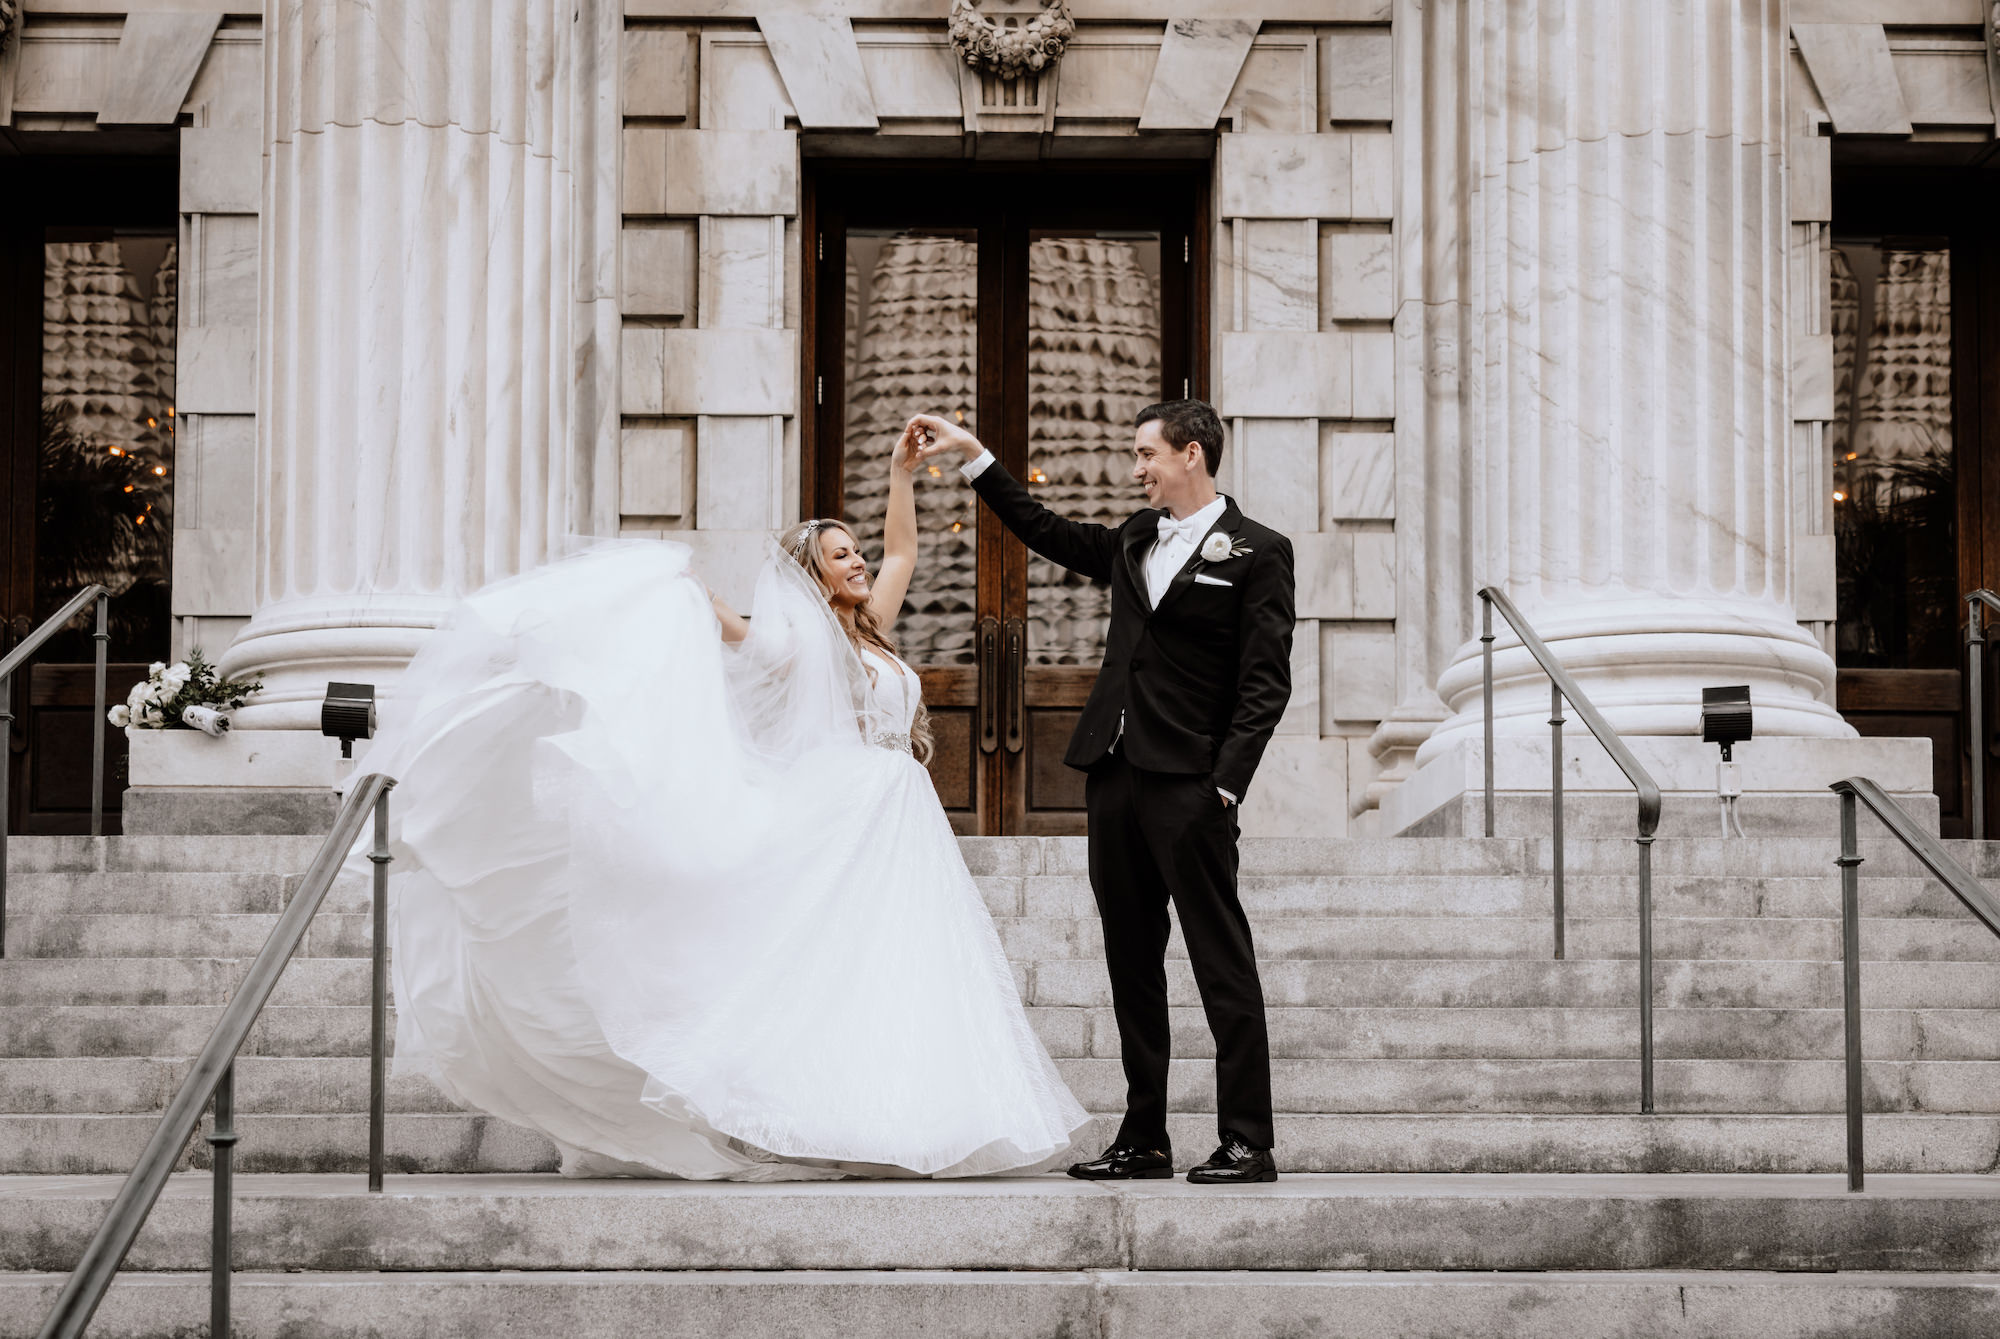 Winter Inspired Wedding, Bride and Groom Wedding Portrait on Staircase of Historic Wedding Venue Le Meridien | Tampa Bay Wedding Hair and Makeup Femme Akoi Beauty Studio